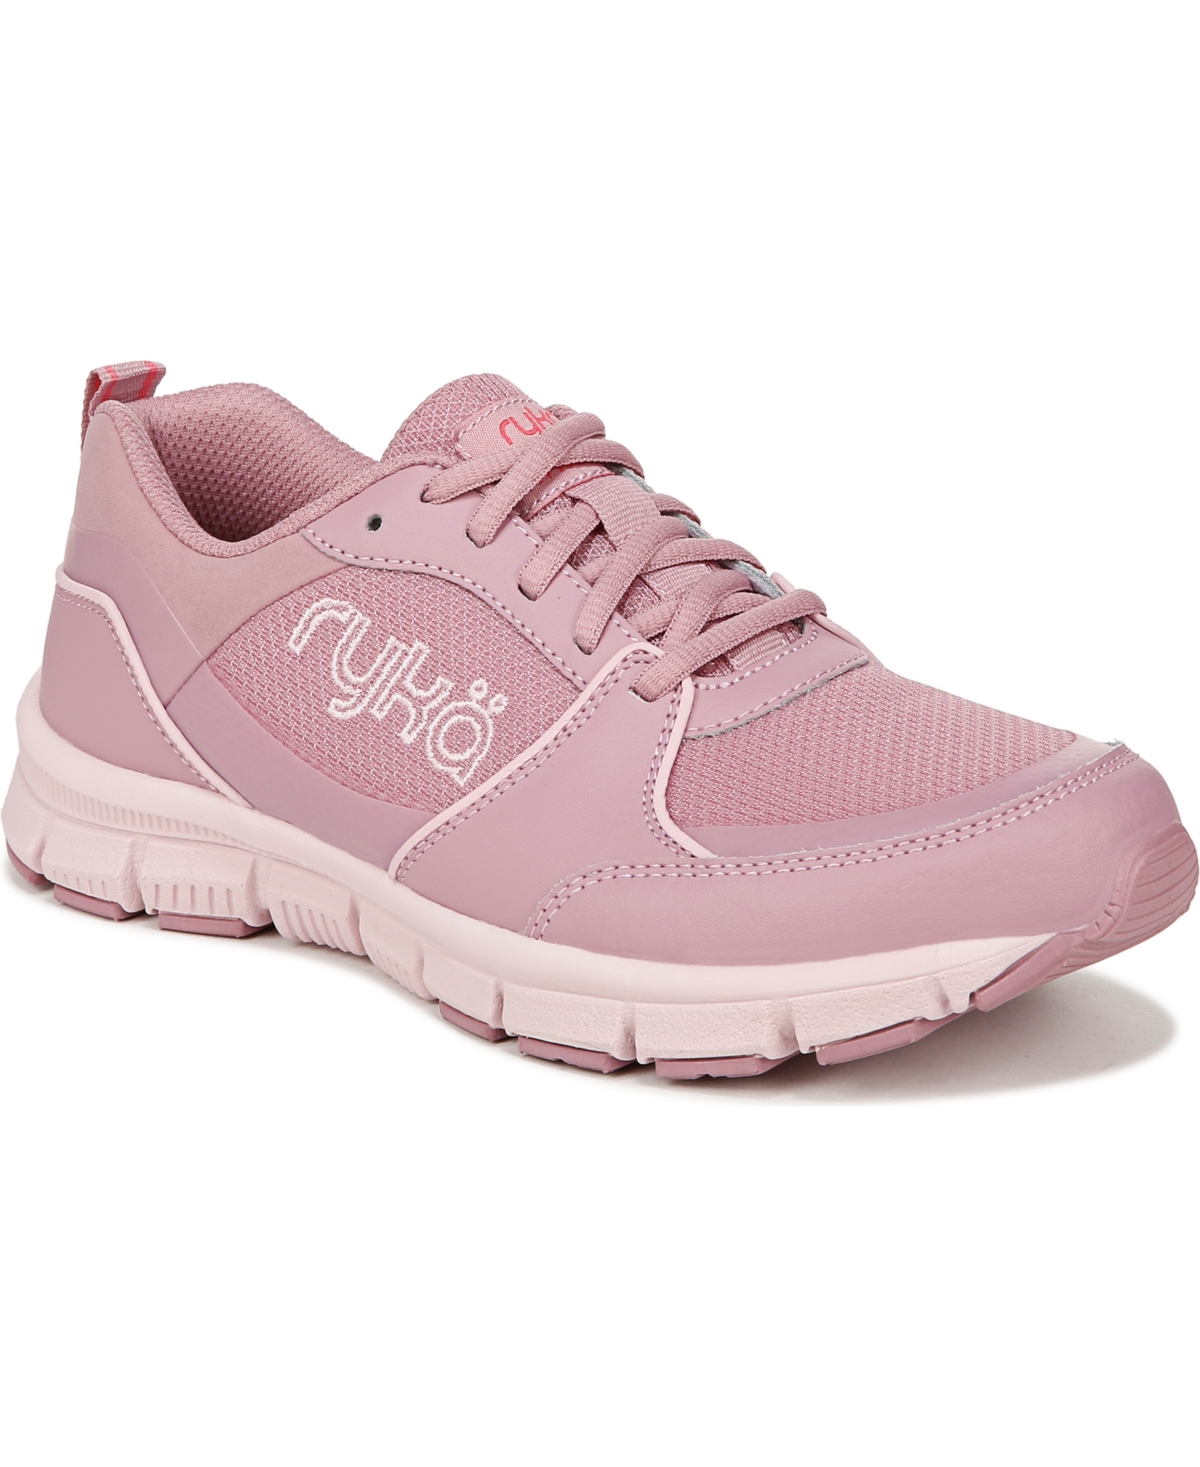 Women's Hypnotize Training Sneakers - Pink Leather/Faux Leather/Mesh